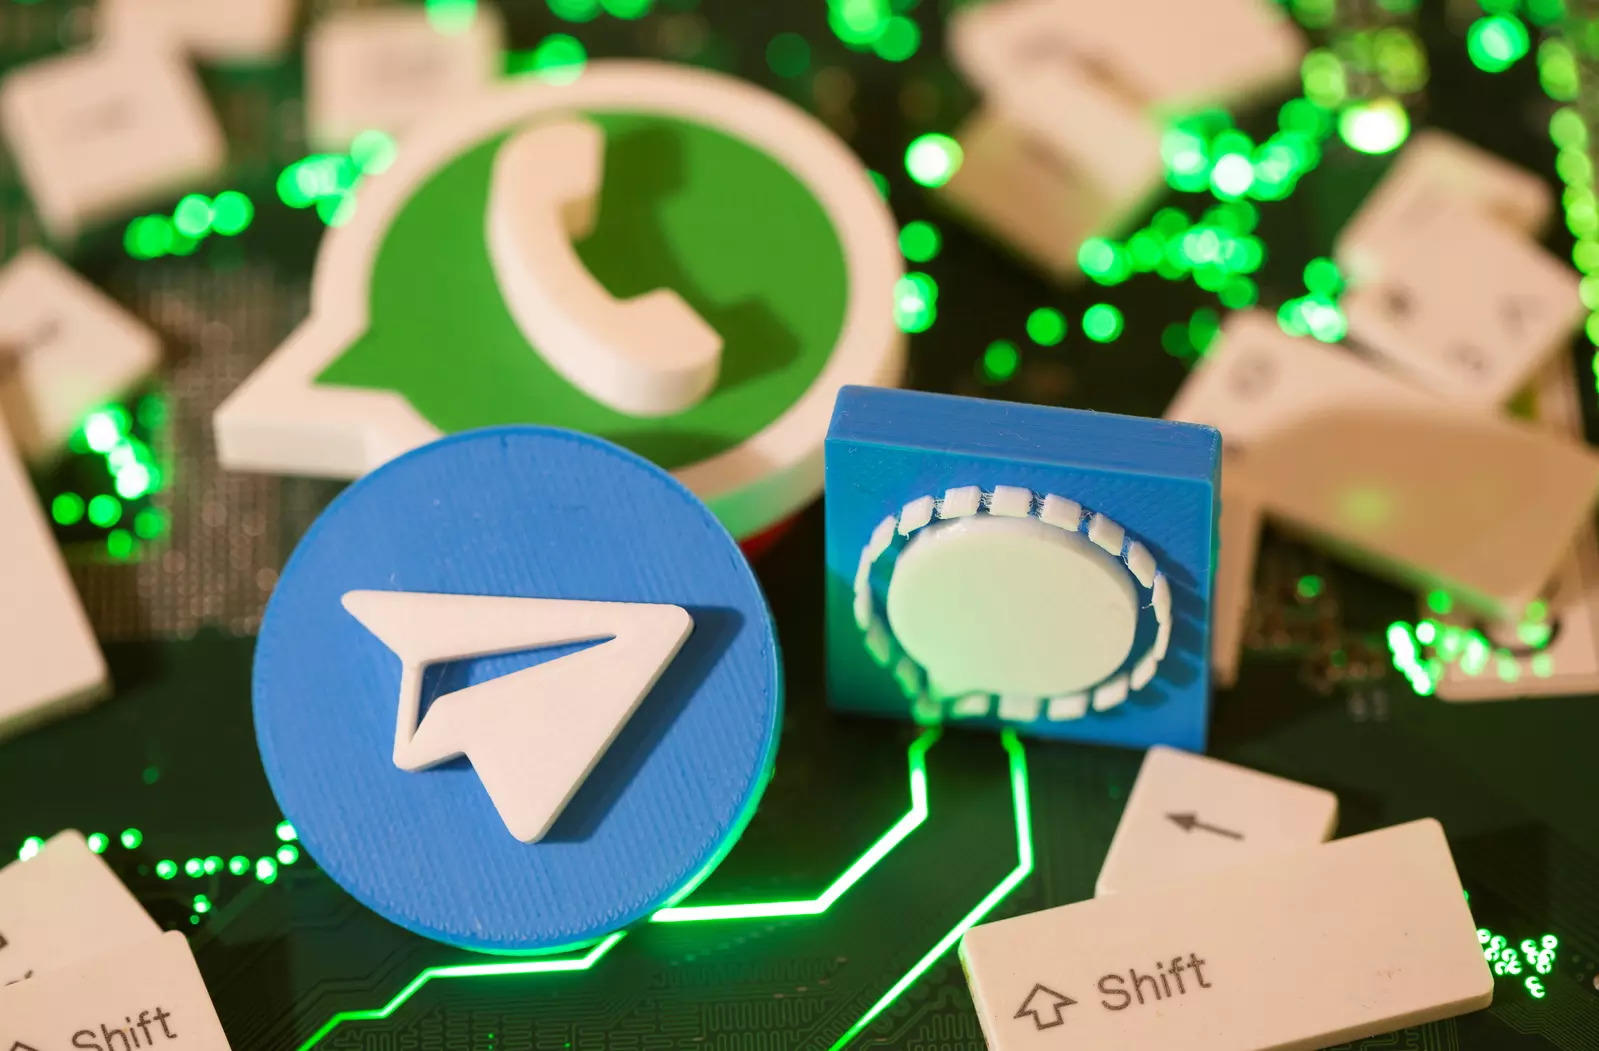 Illustration of 3D printed Facebook, Signal and WhatsApp logos and keyboard buttons on a computer motherboard